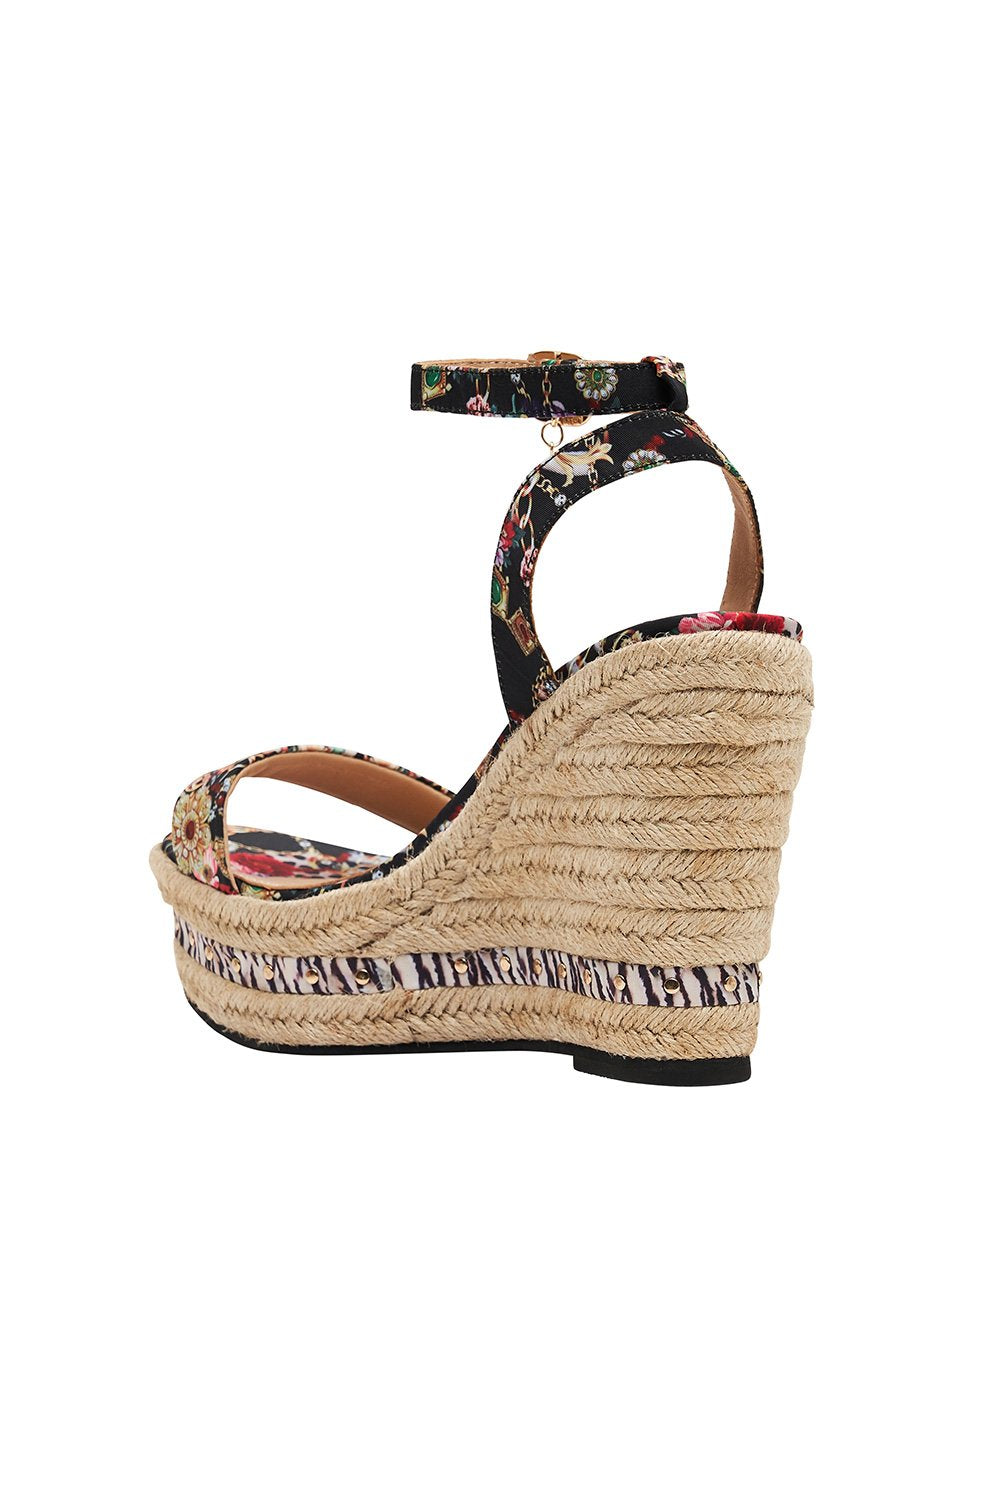 ESPADRILLE WEDGE A NIGHT IN THE 90S